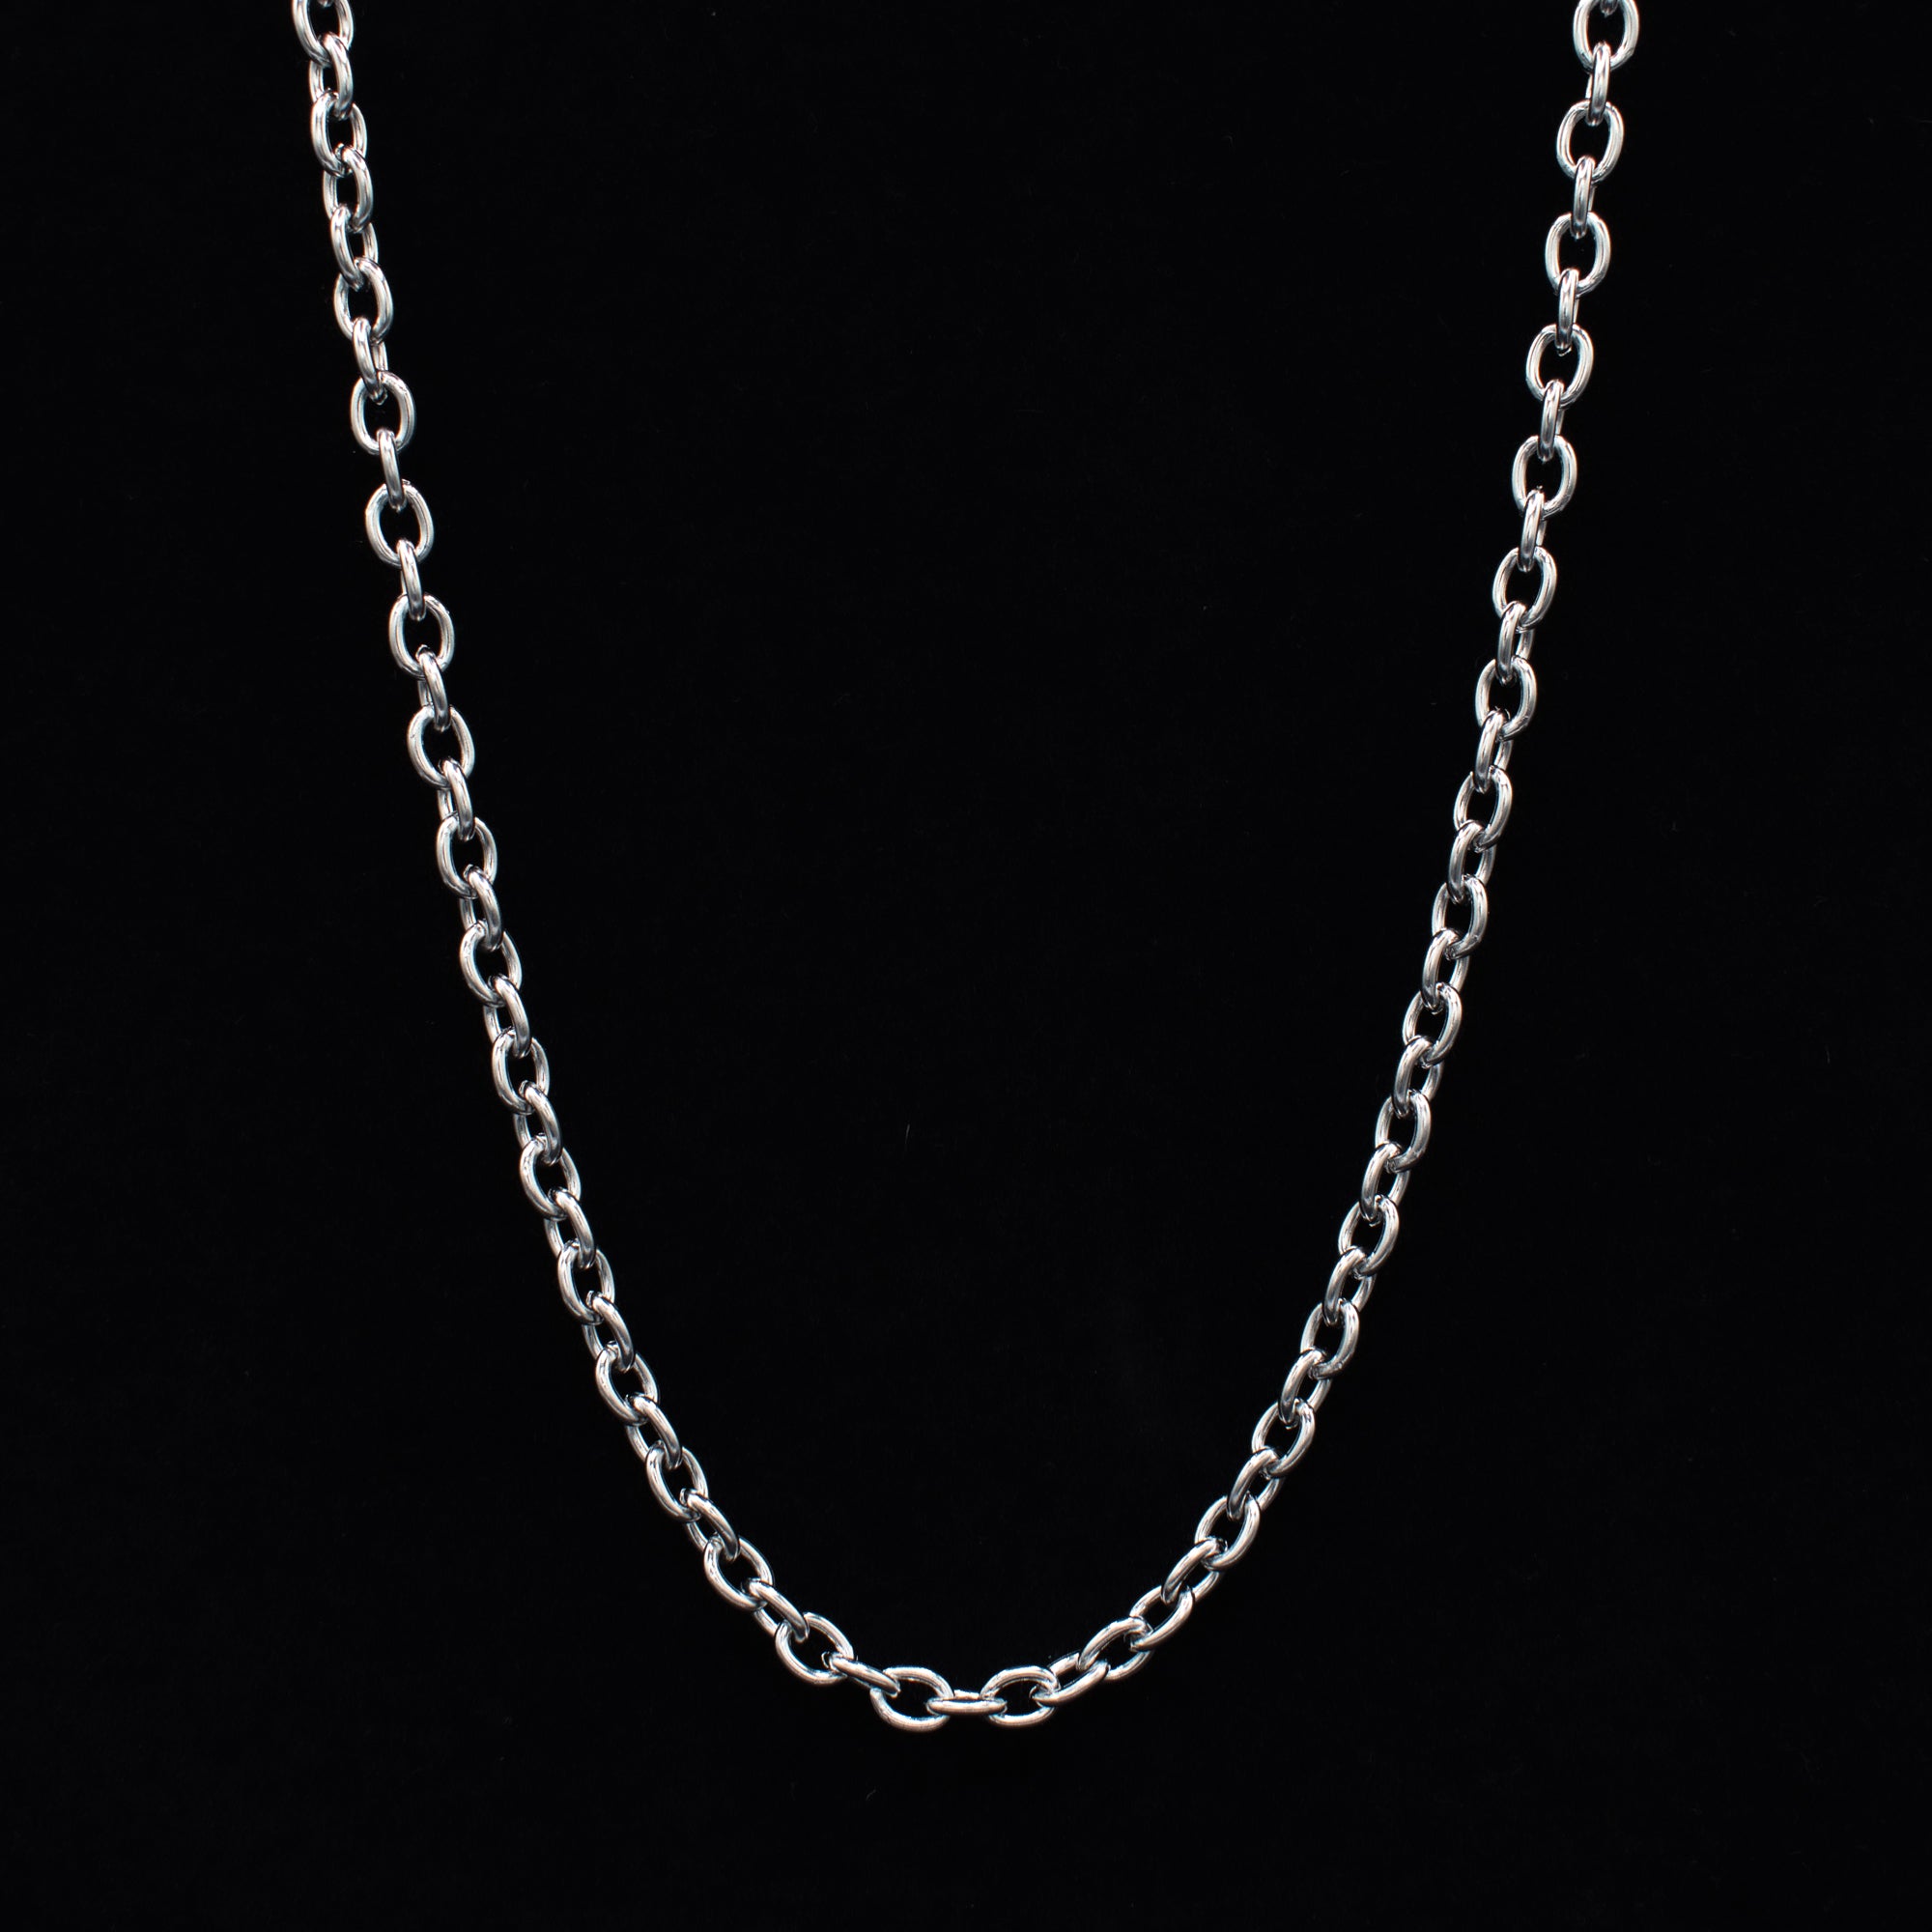 Cable Chain Necklace - (Silver) 6mm